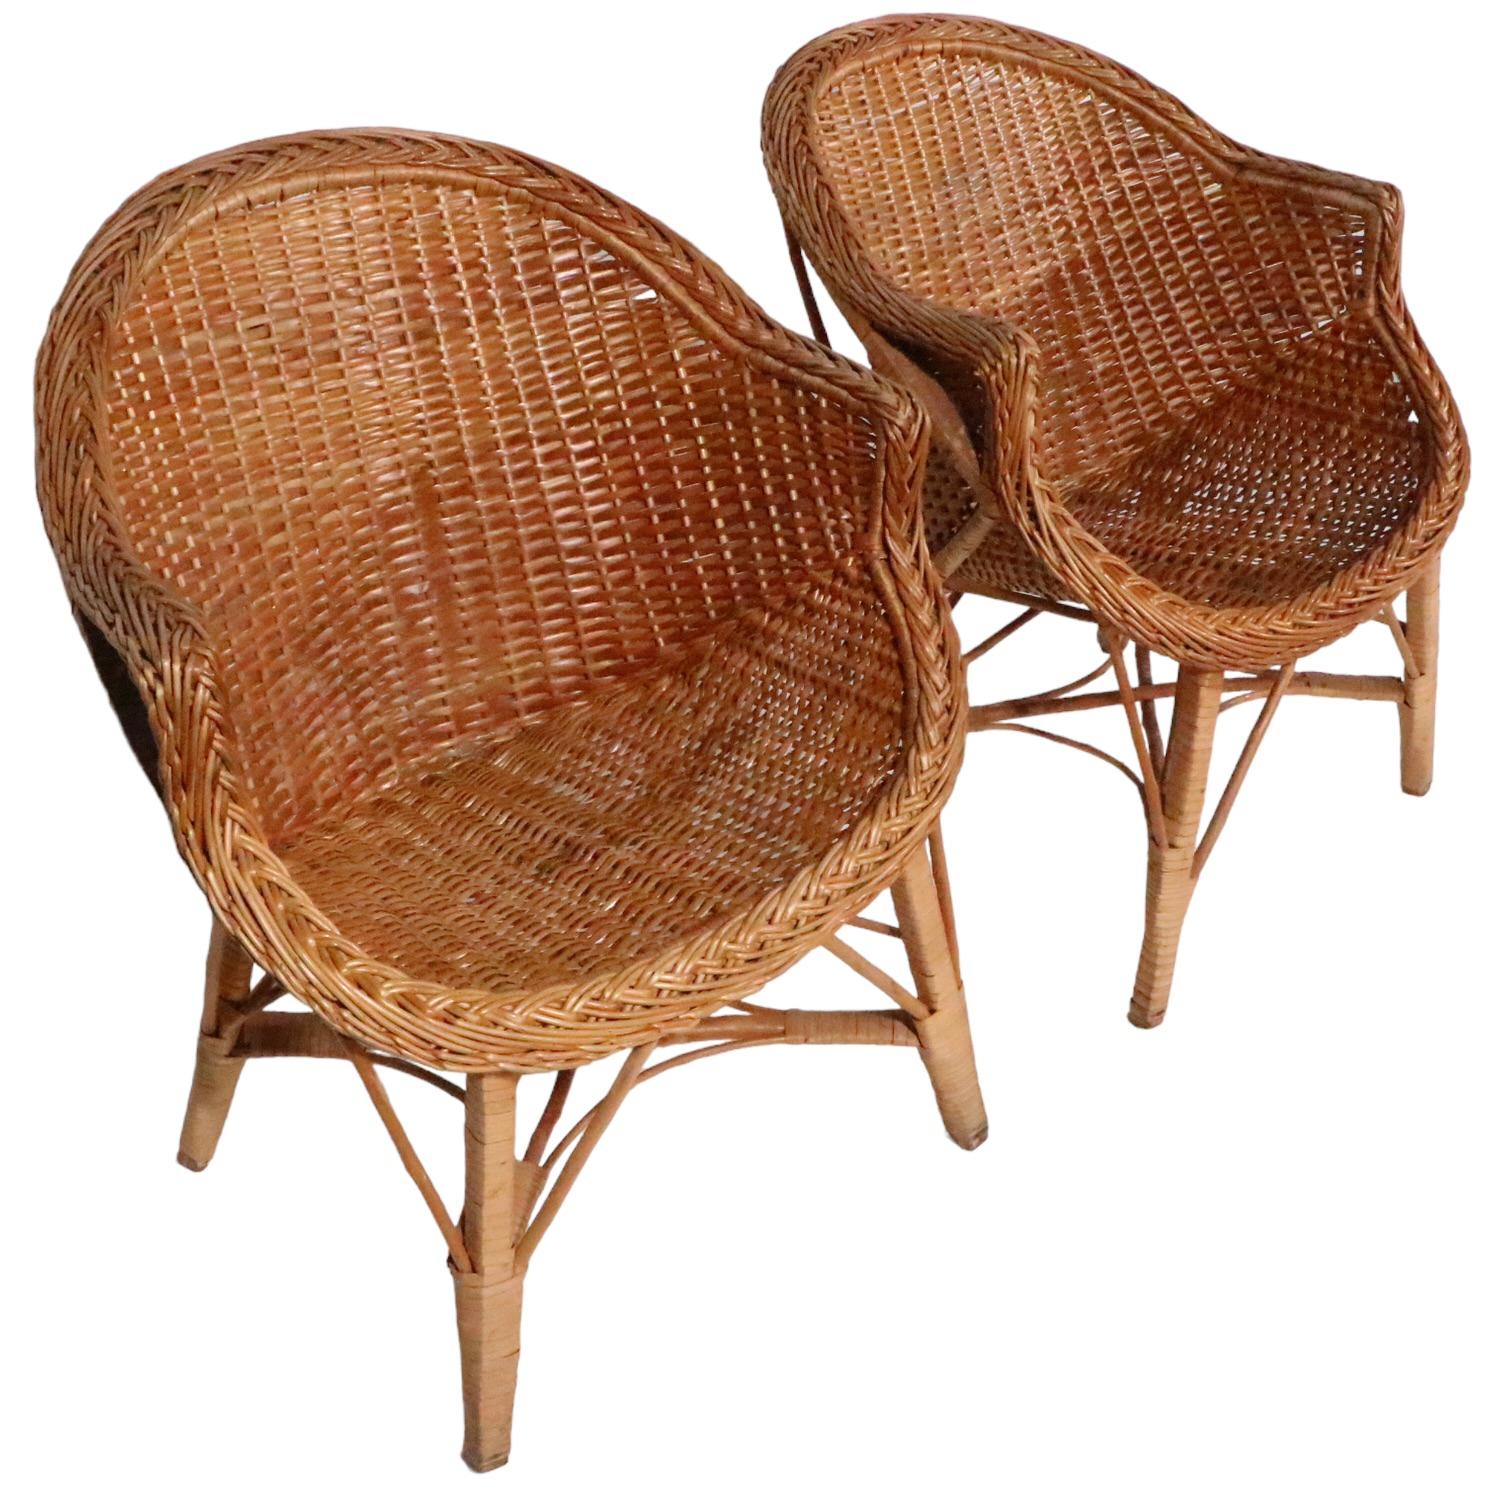 Pr  Mid Century Woven Wicker Arm Chairs  In Good Condition For Sale In New York, NY